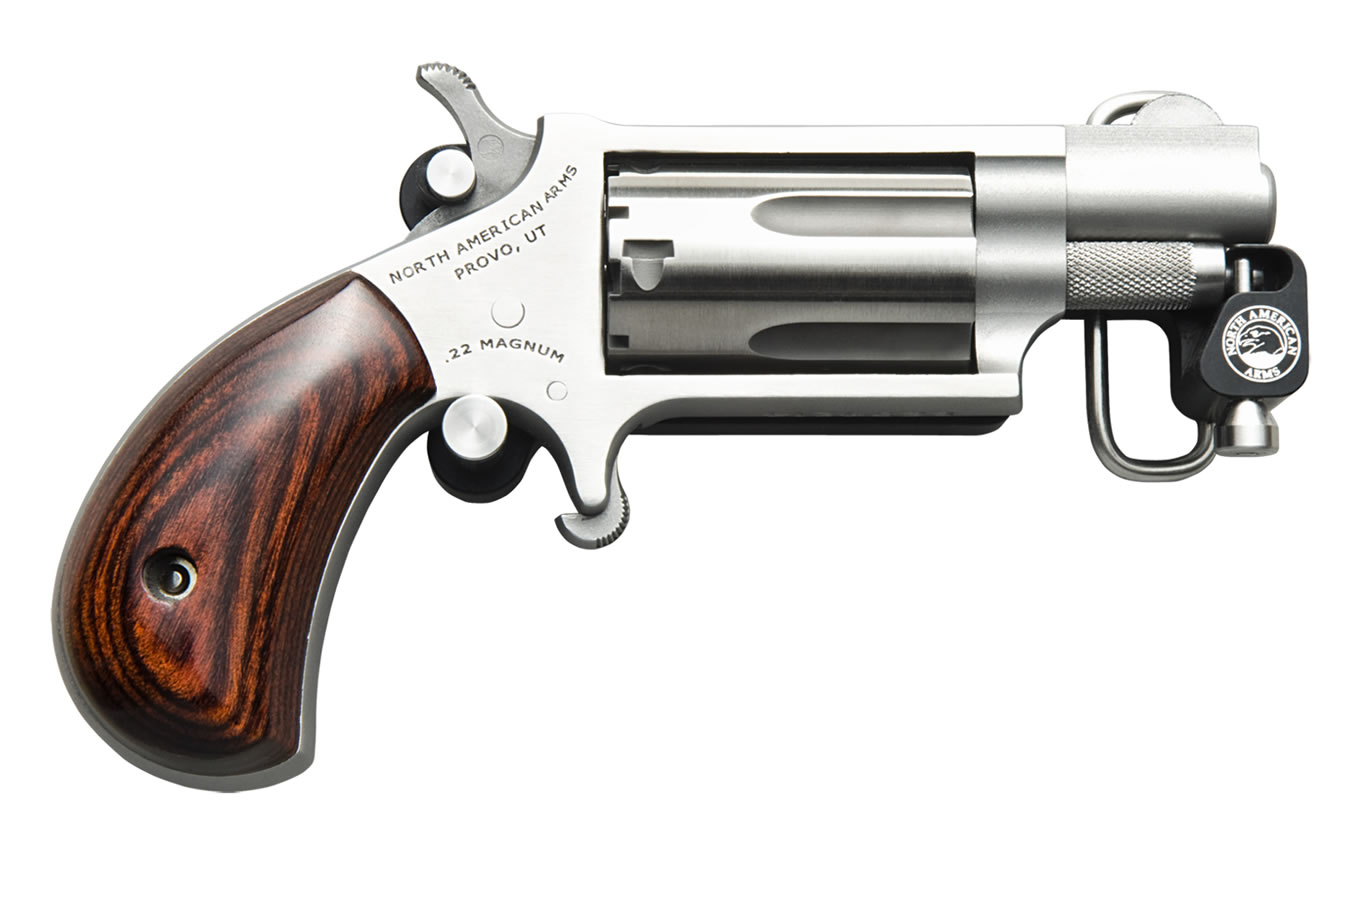 No. 11 Best Selling: NORTH AMERICAN ARMS 22 MAG MINI REVOLVER 22 1.125 IN BBL